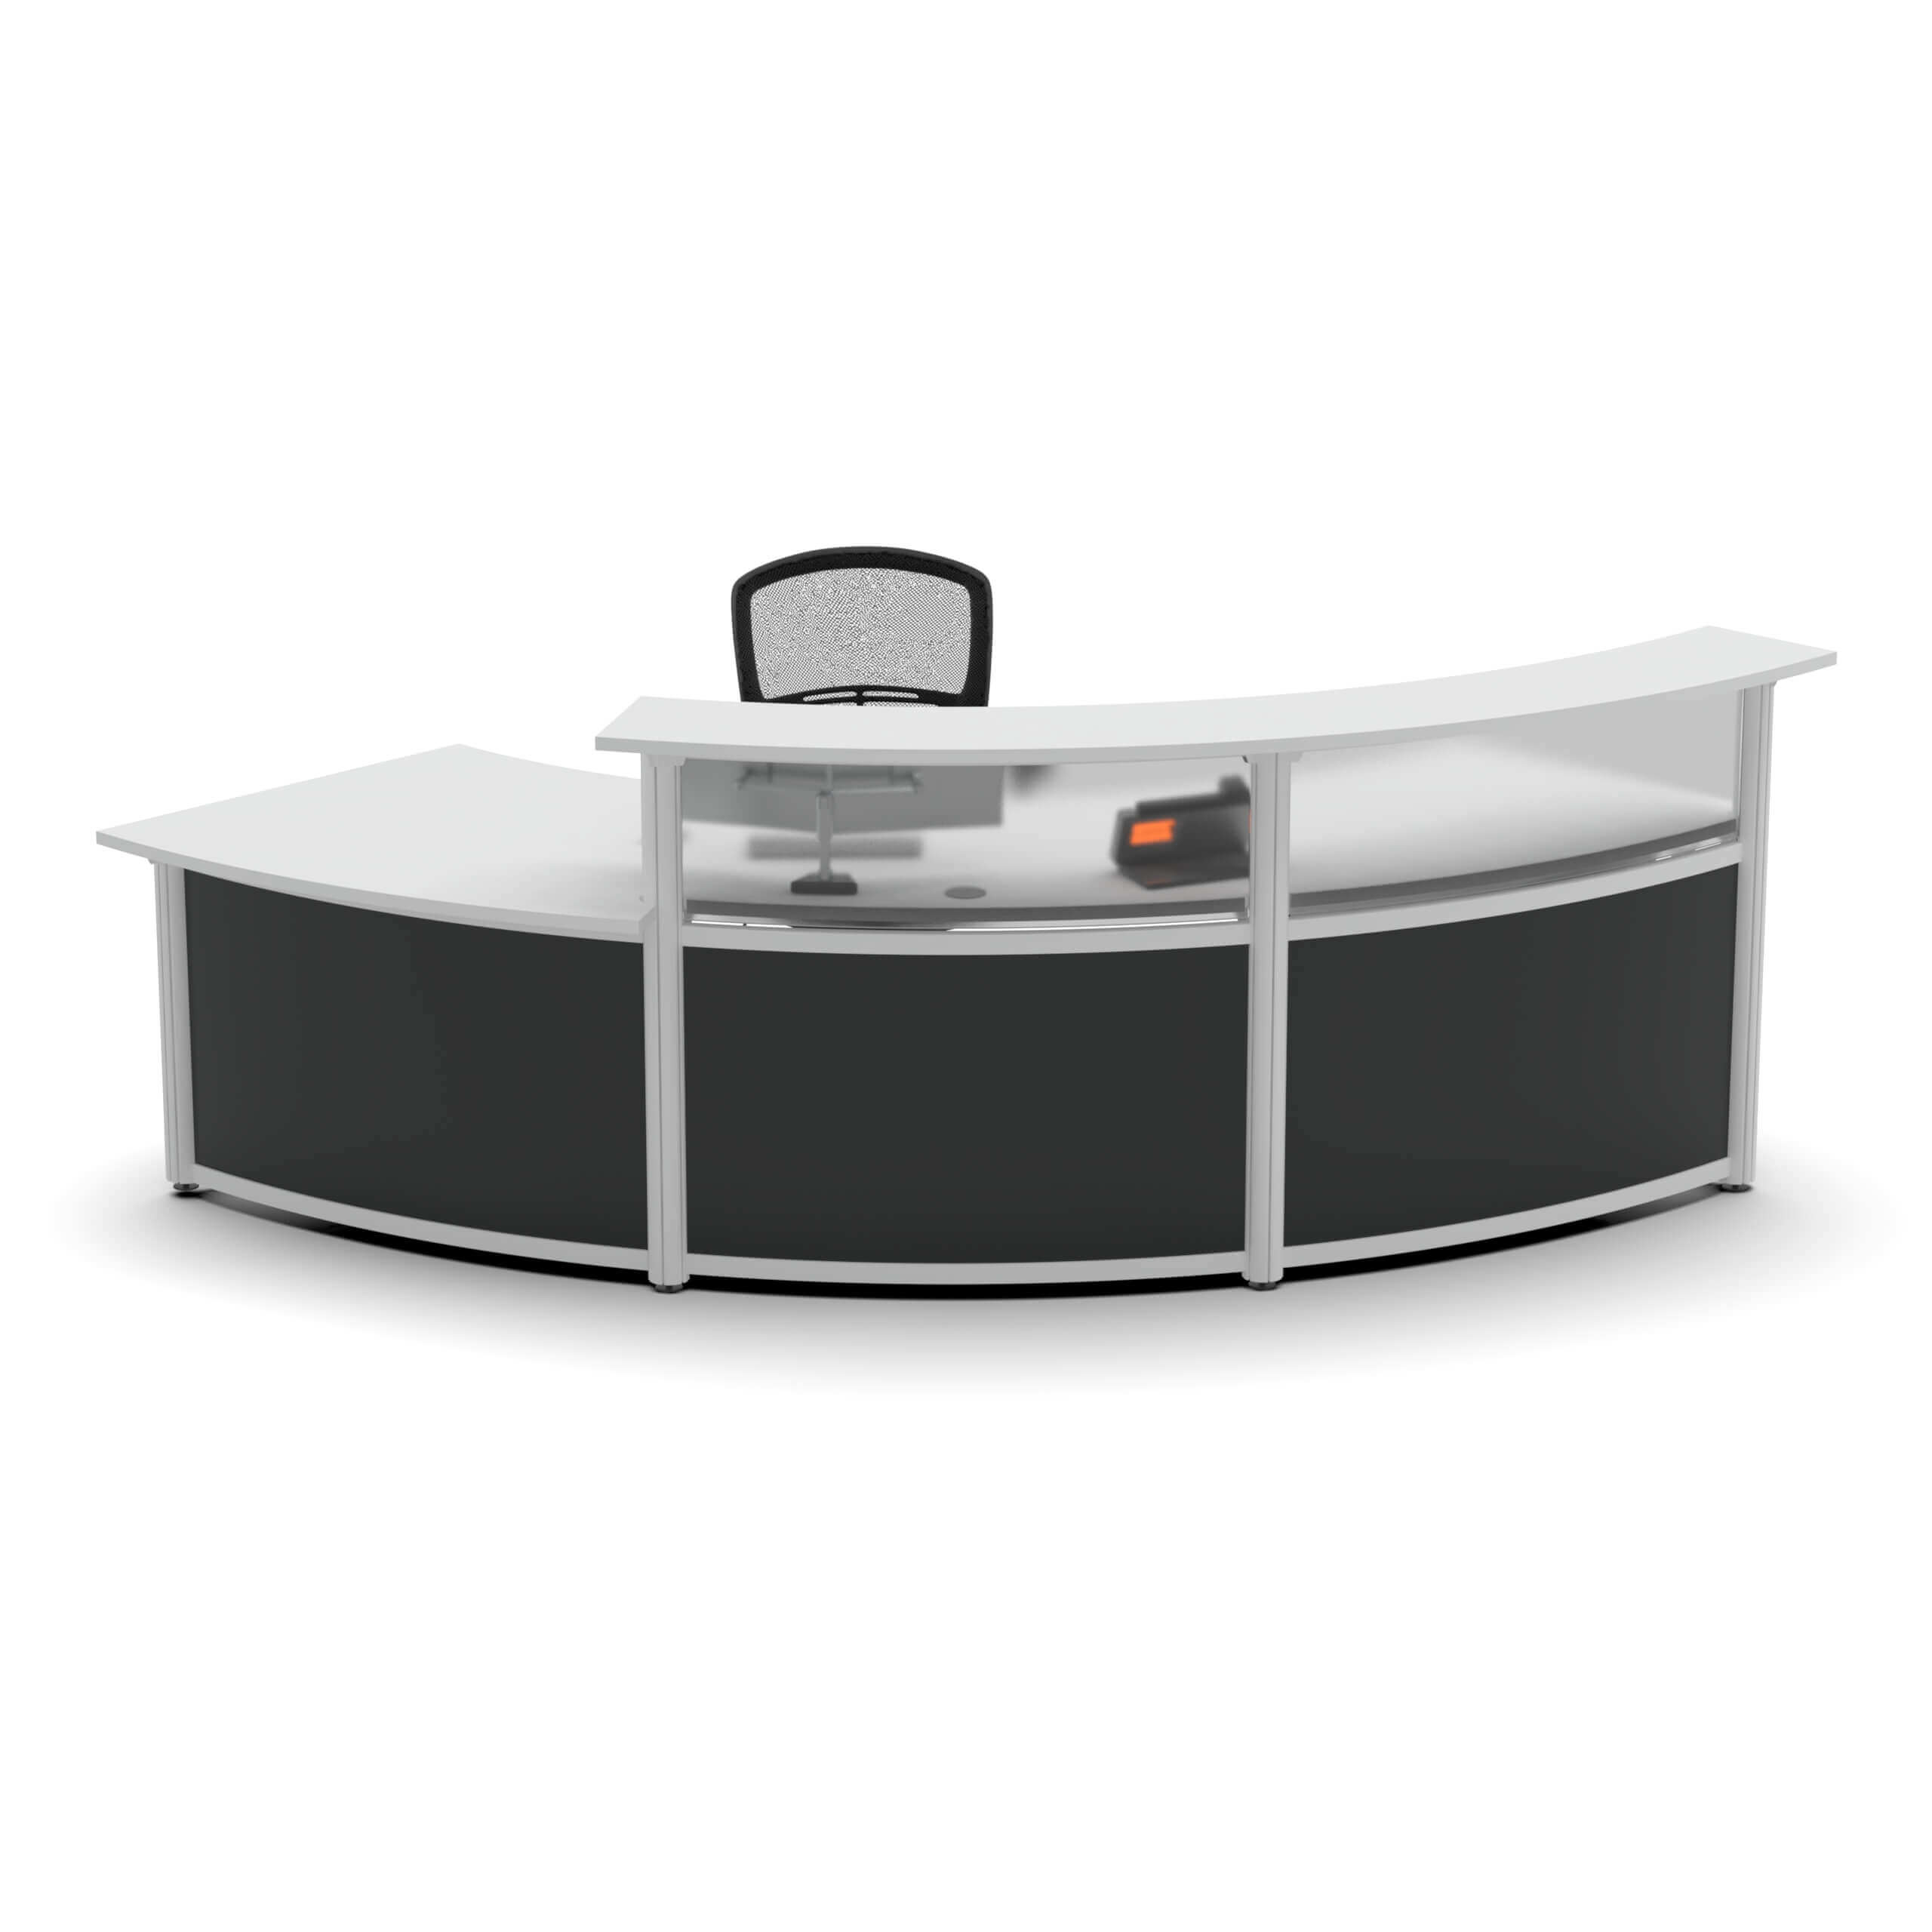 corner-reception-desk-with-fron-curve-front-view.jpg